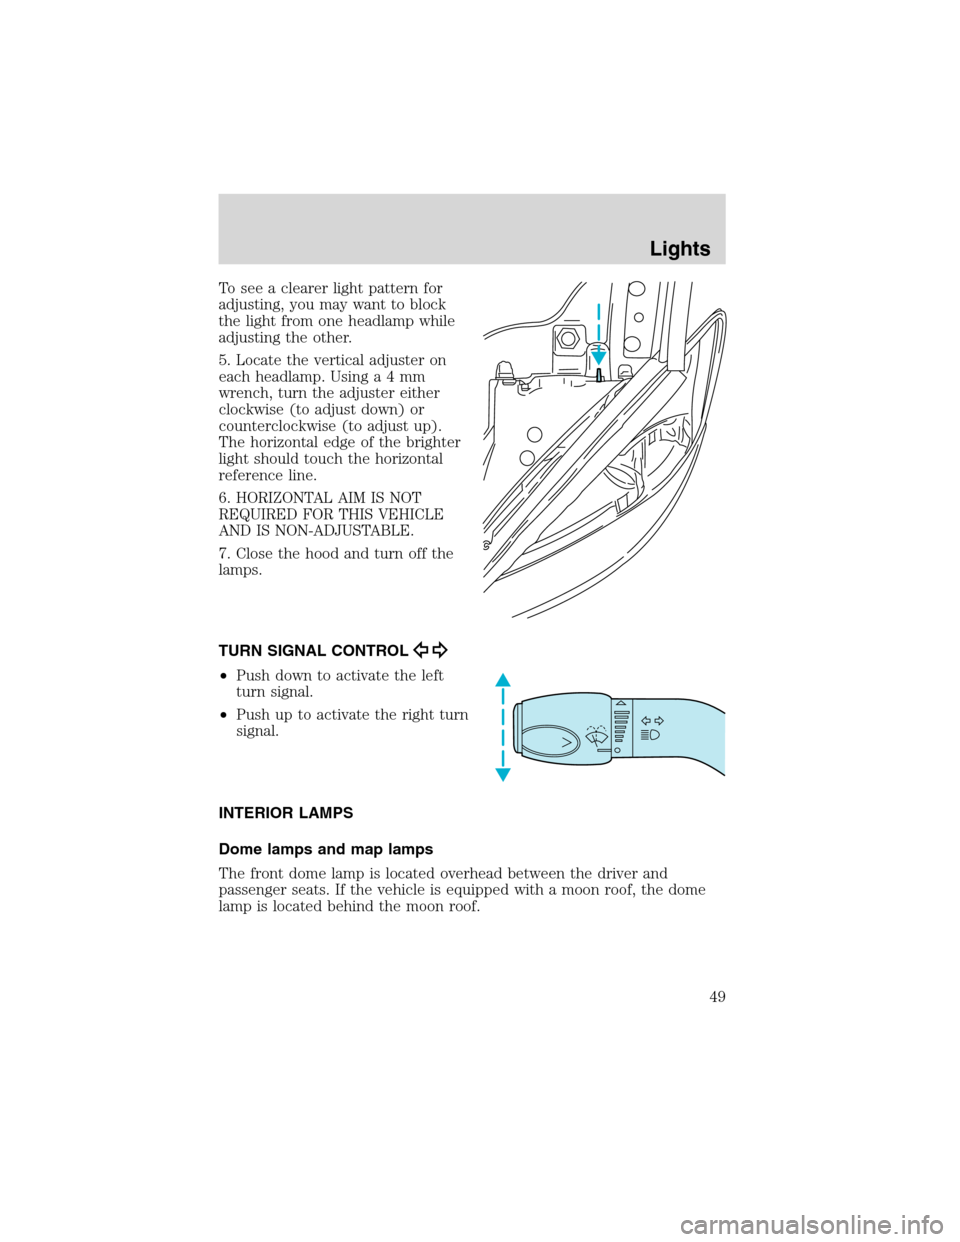 Mercury Sable 2002  Owners Manuals To see a clearer light pattern for
adjusting, you may want to block
the light from one headlamp while
adjusting the other.
5. Locate the vertical adjuster on
each headlamp. Usinga4mm
wrench, turn the 